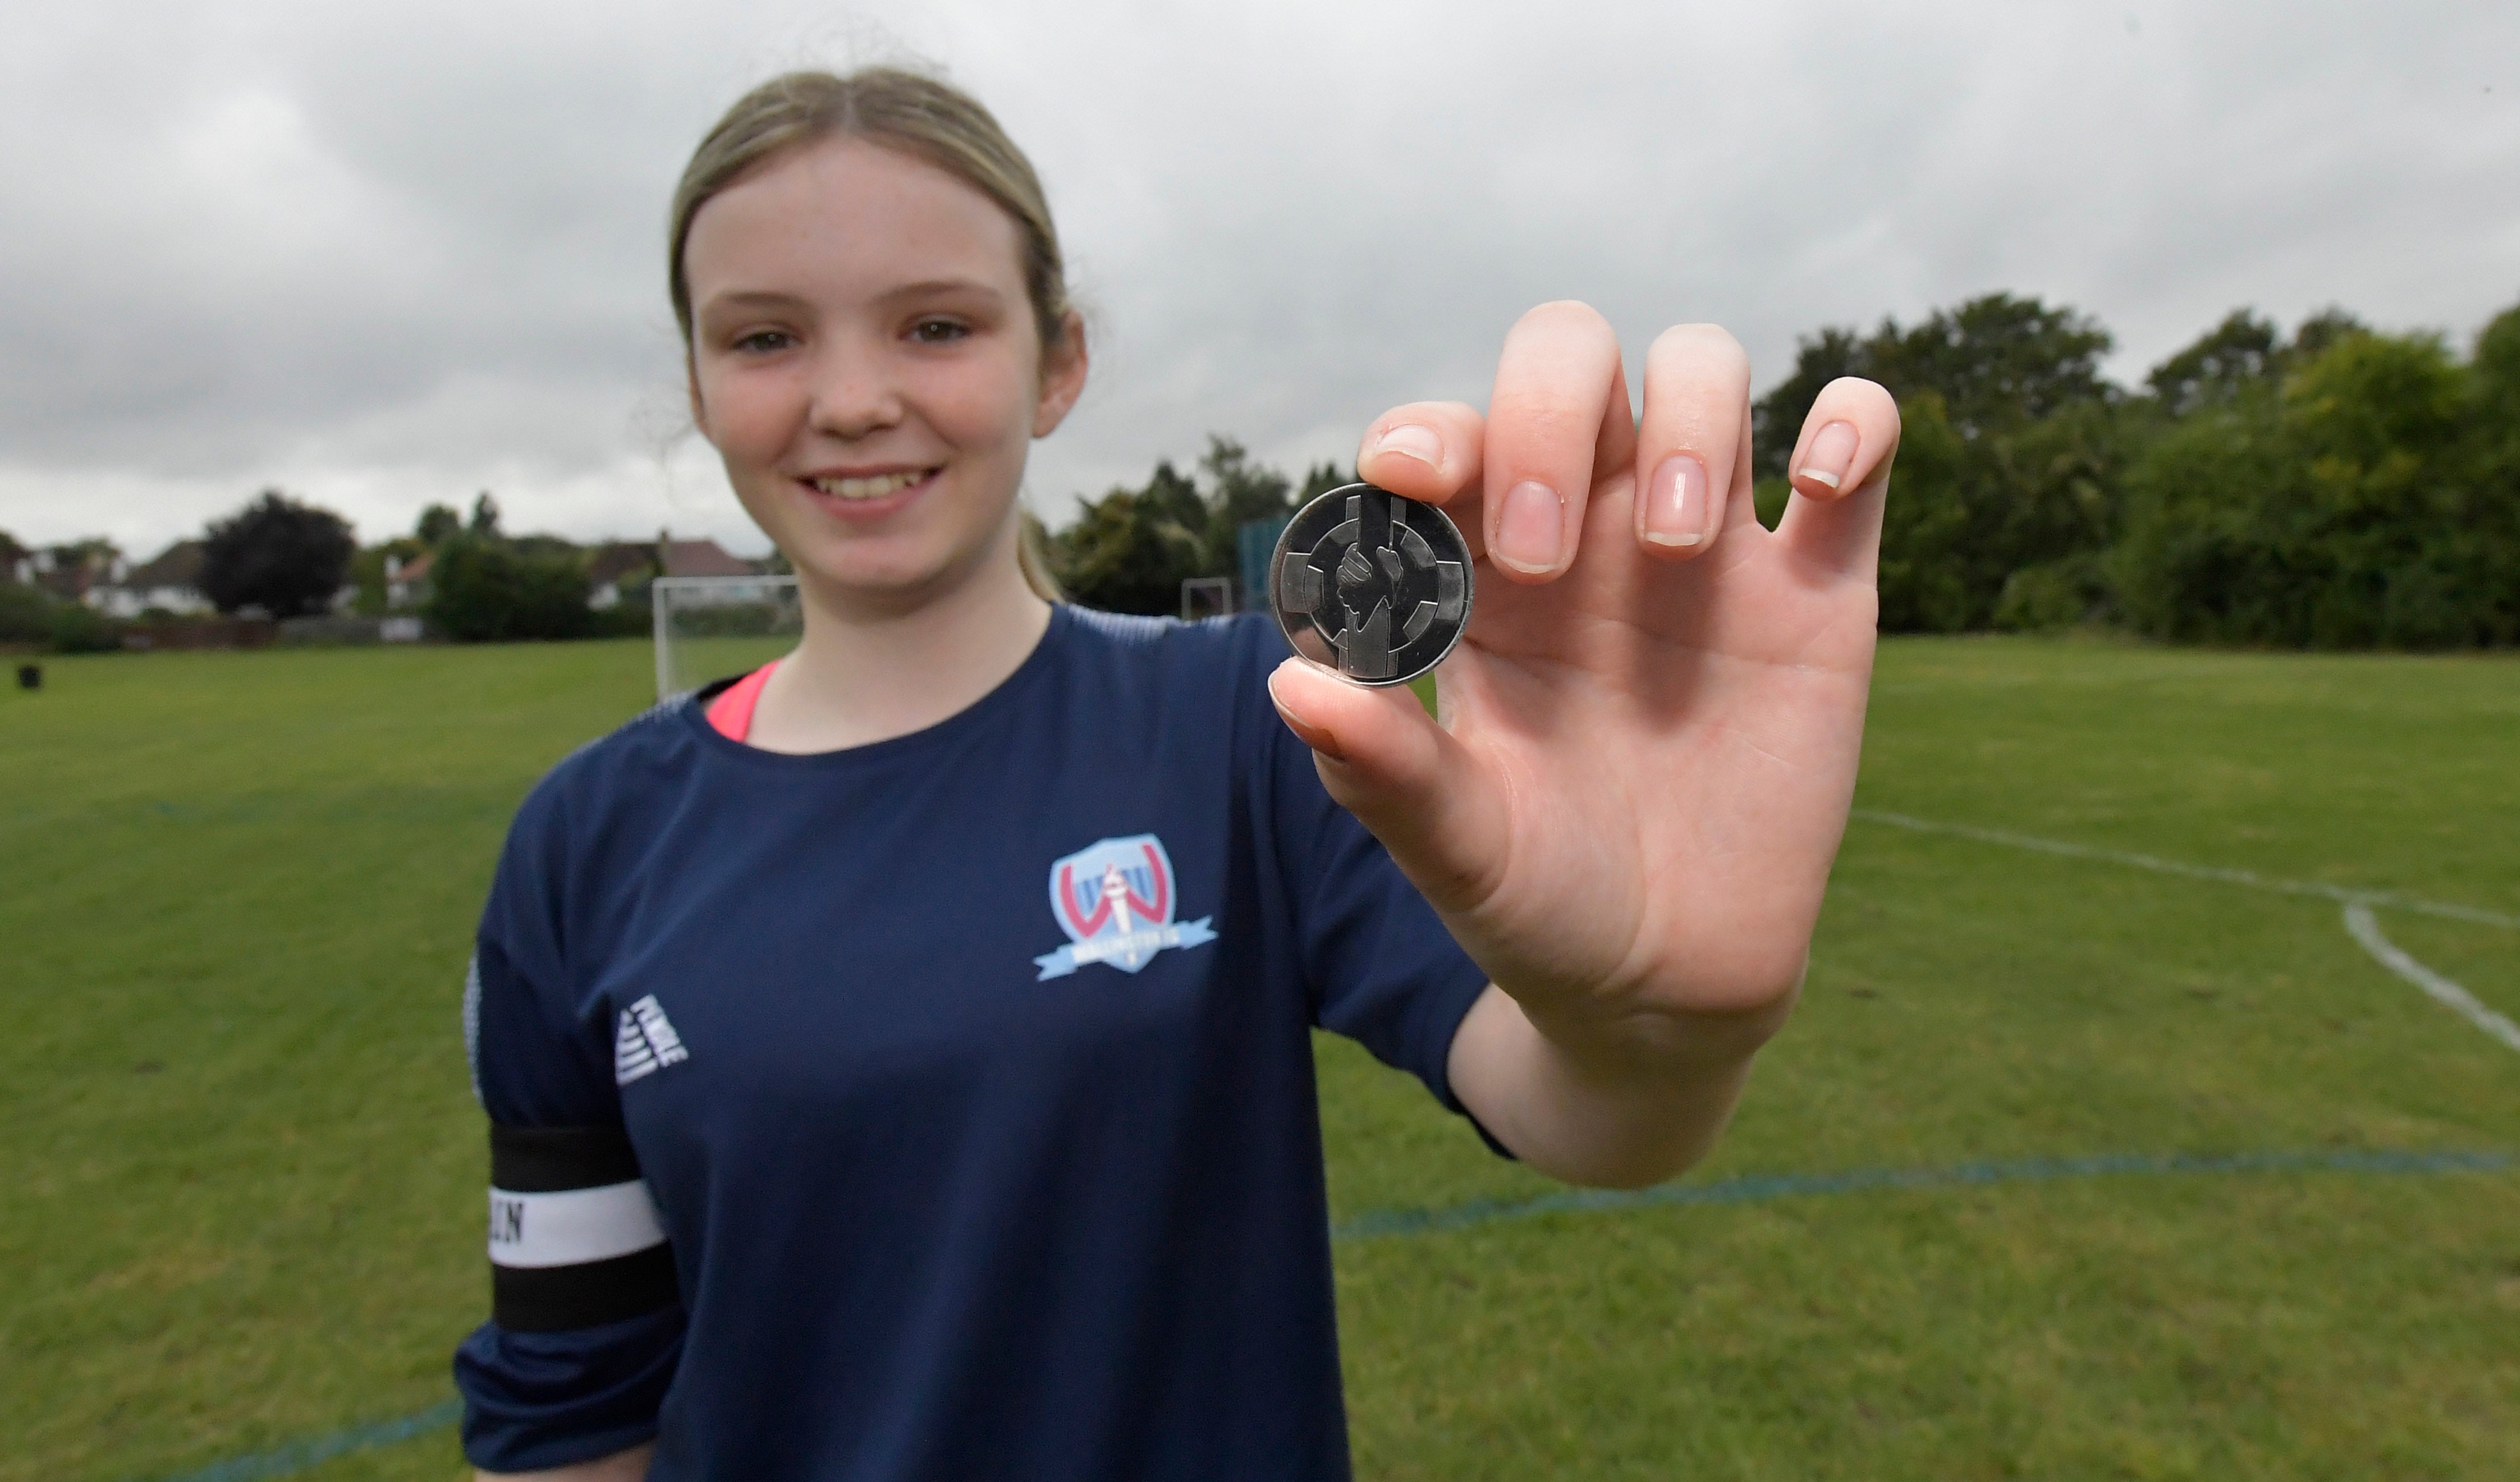 Competition winner Chloe displays her winning Coin for Respect design (Handout/Nationwide/PA)